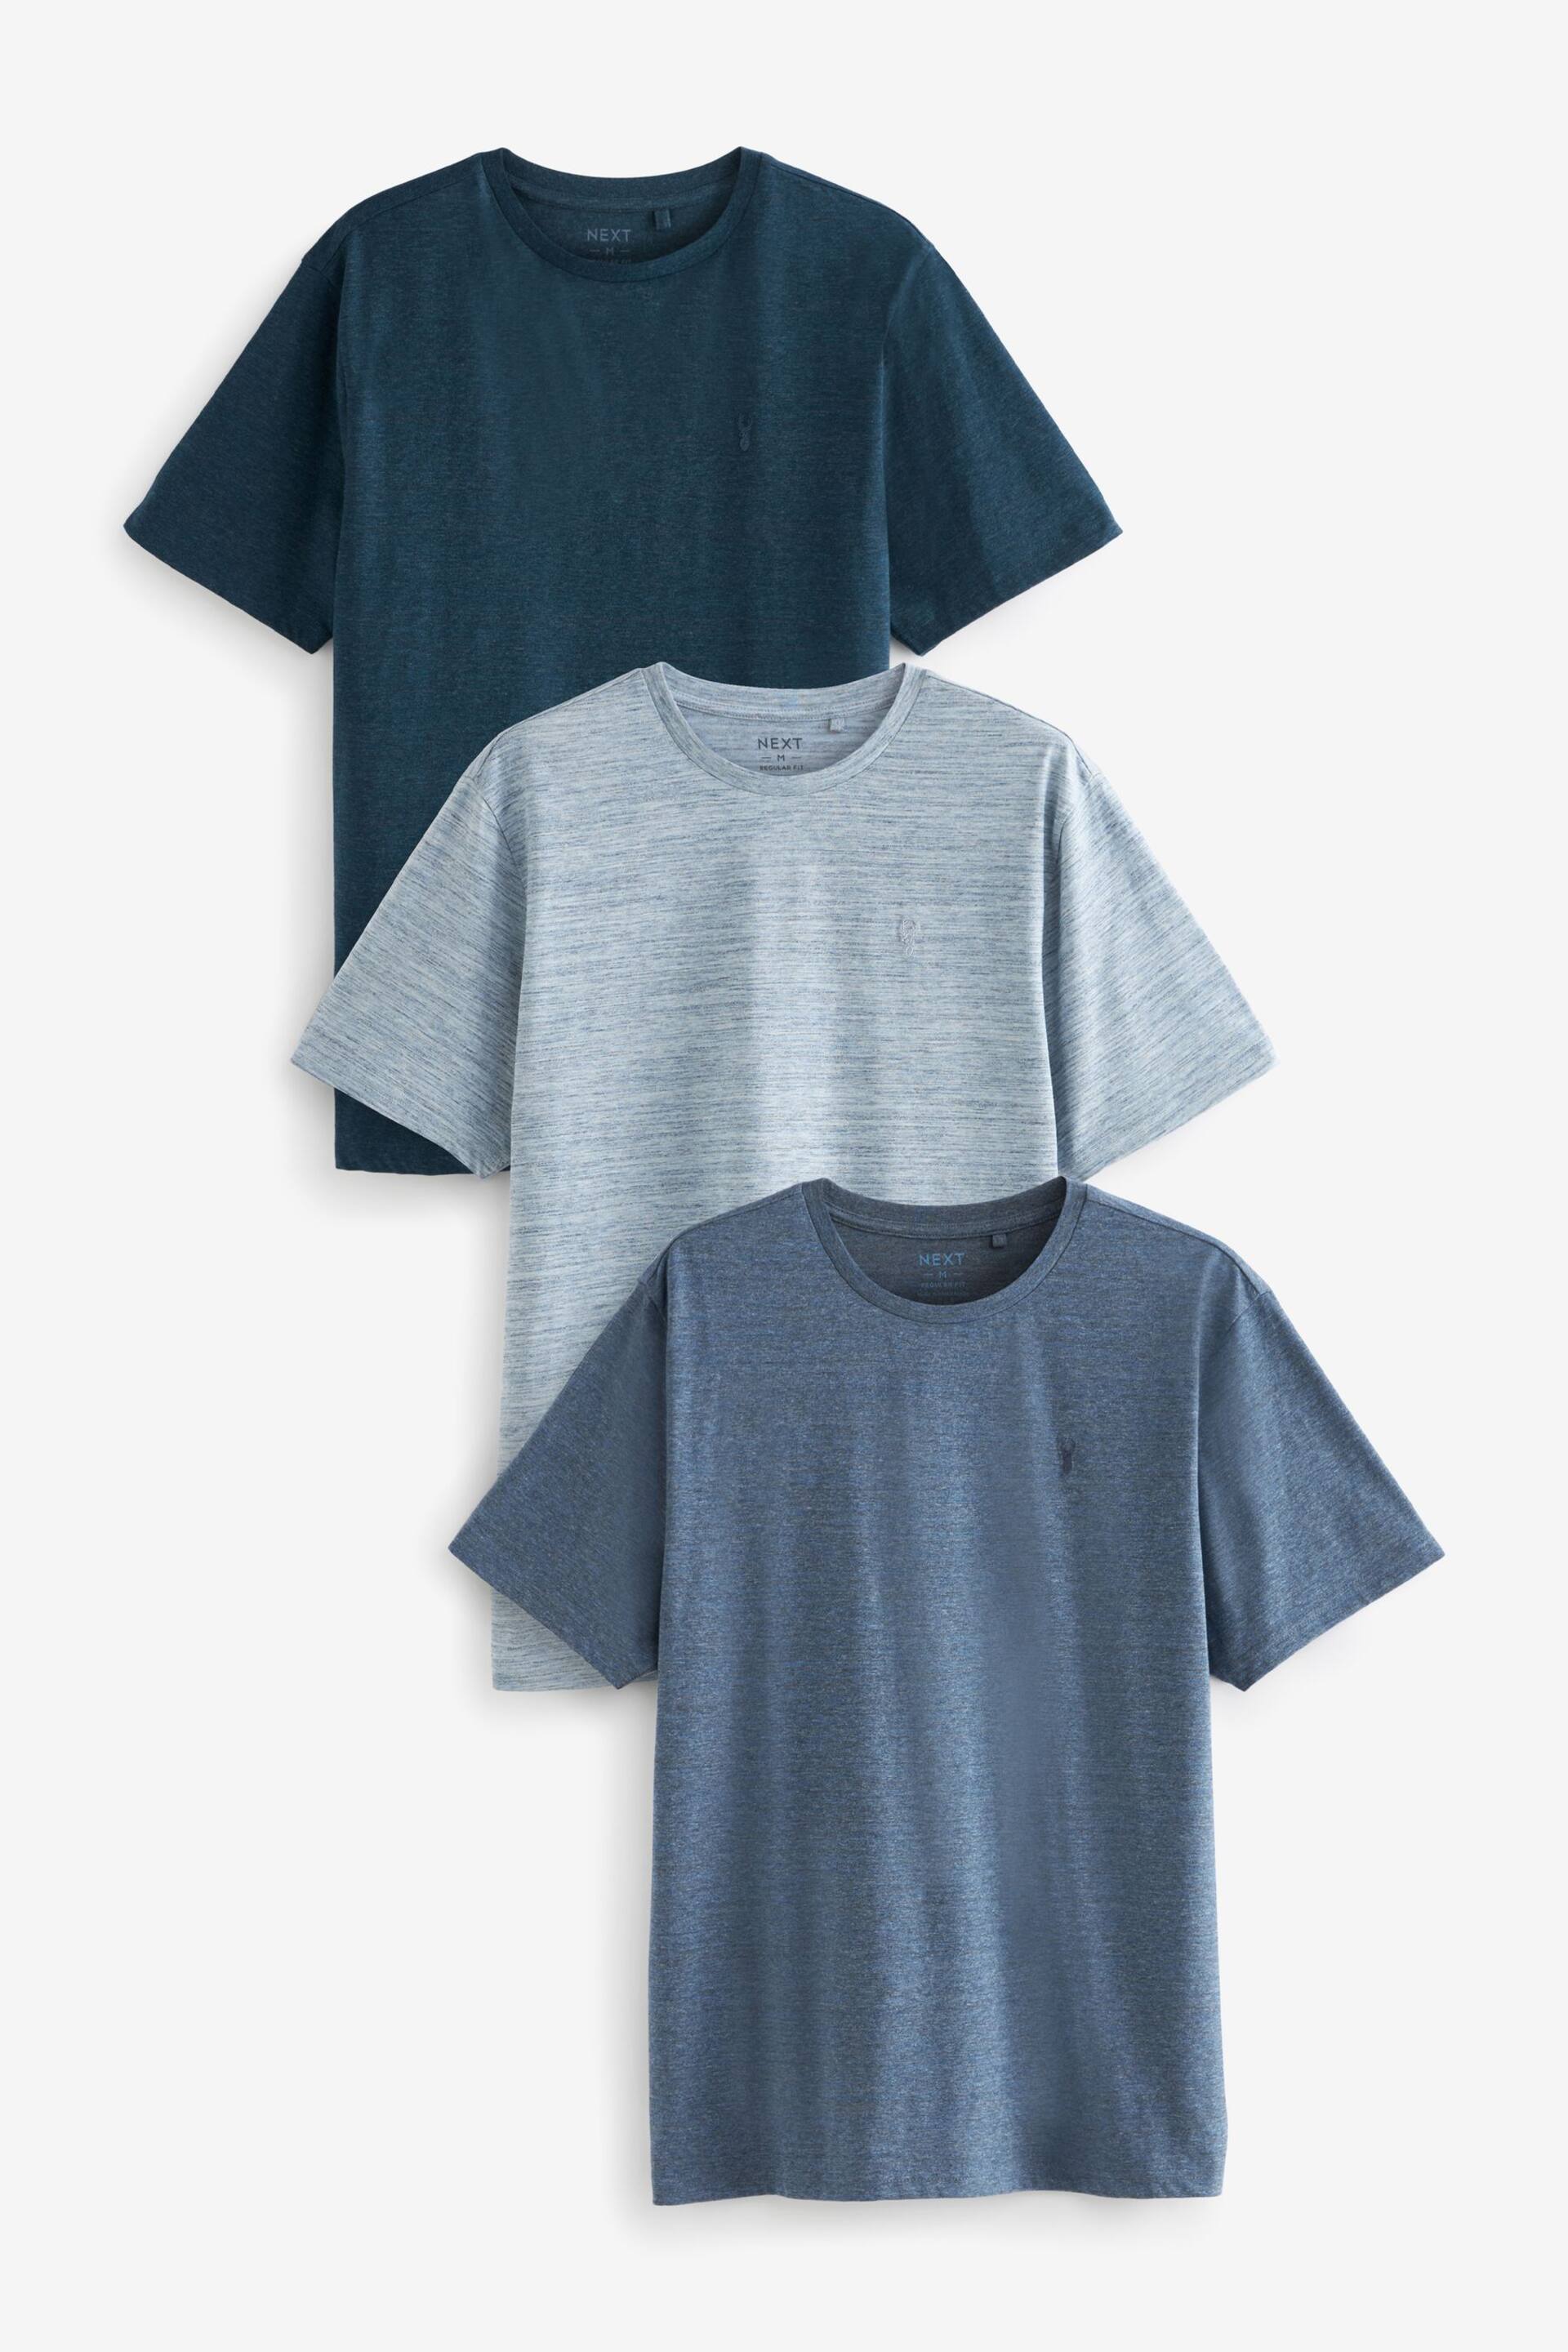 Blue/Navy 3PK Stag Marl T-Shirts - Image 9 of 14